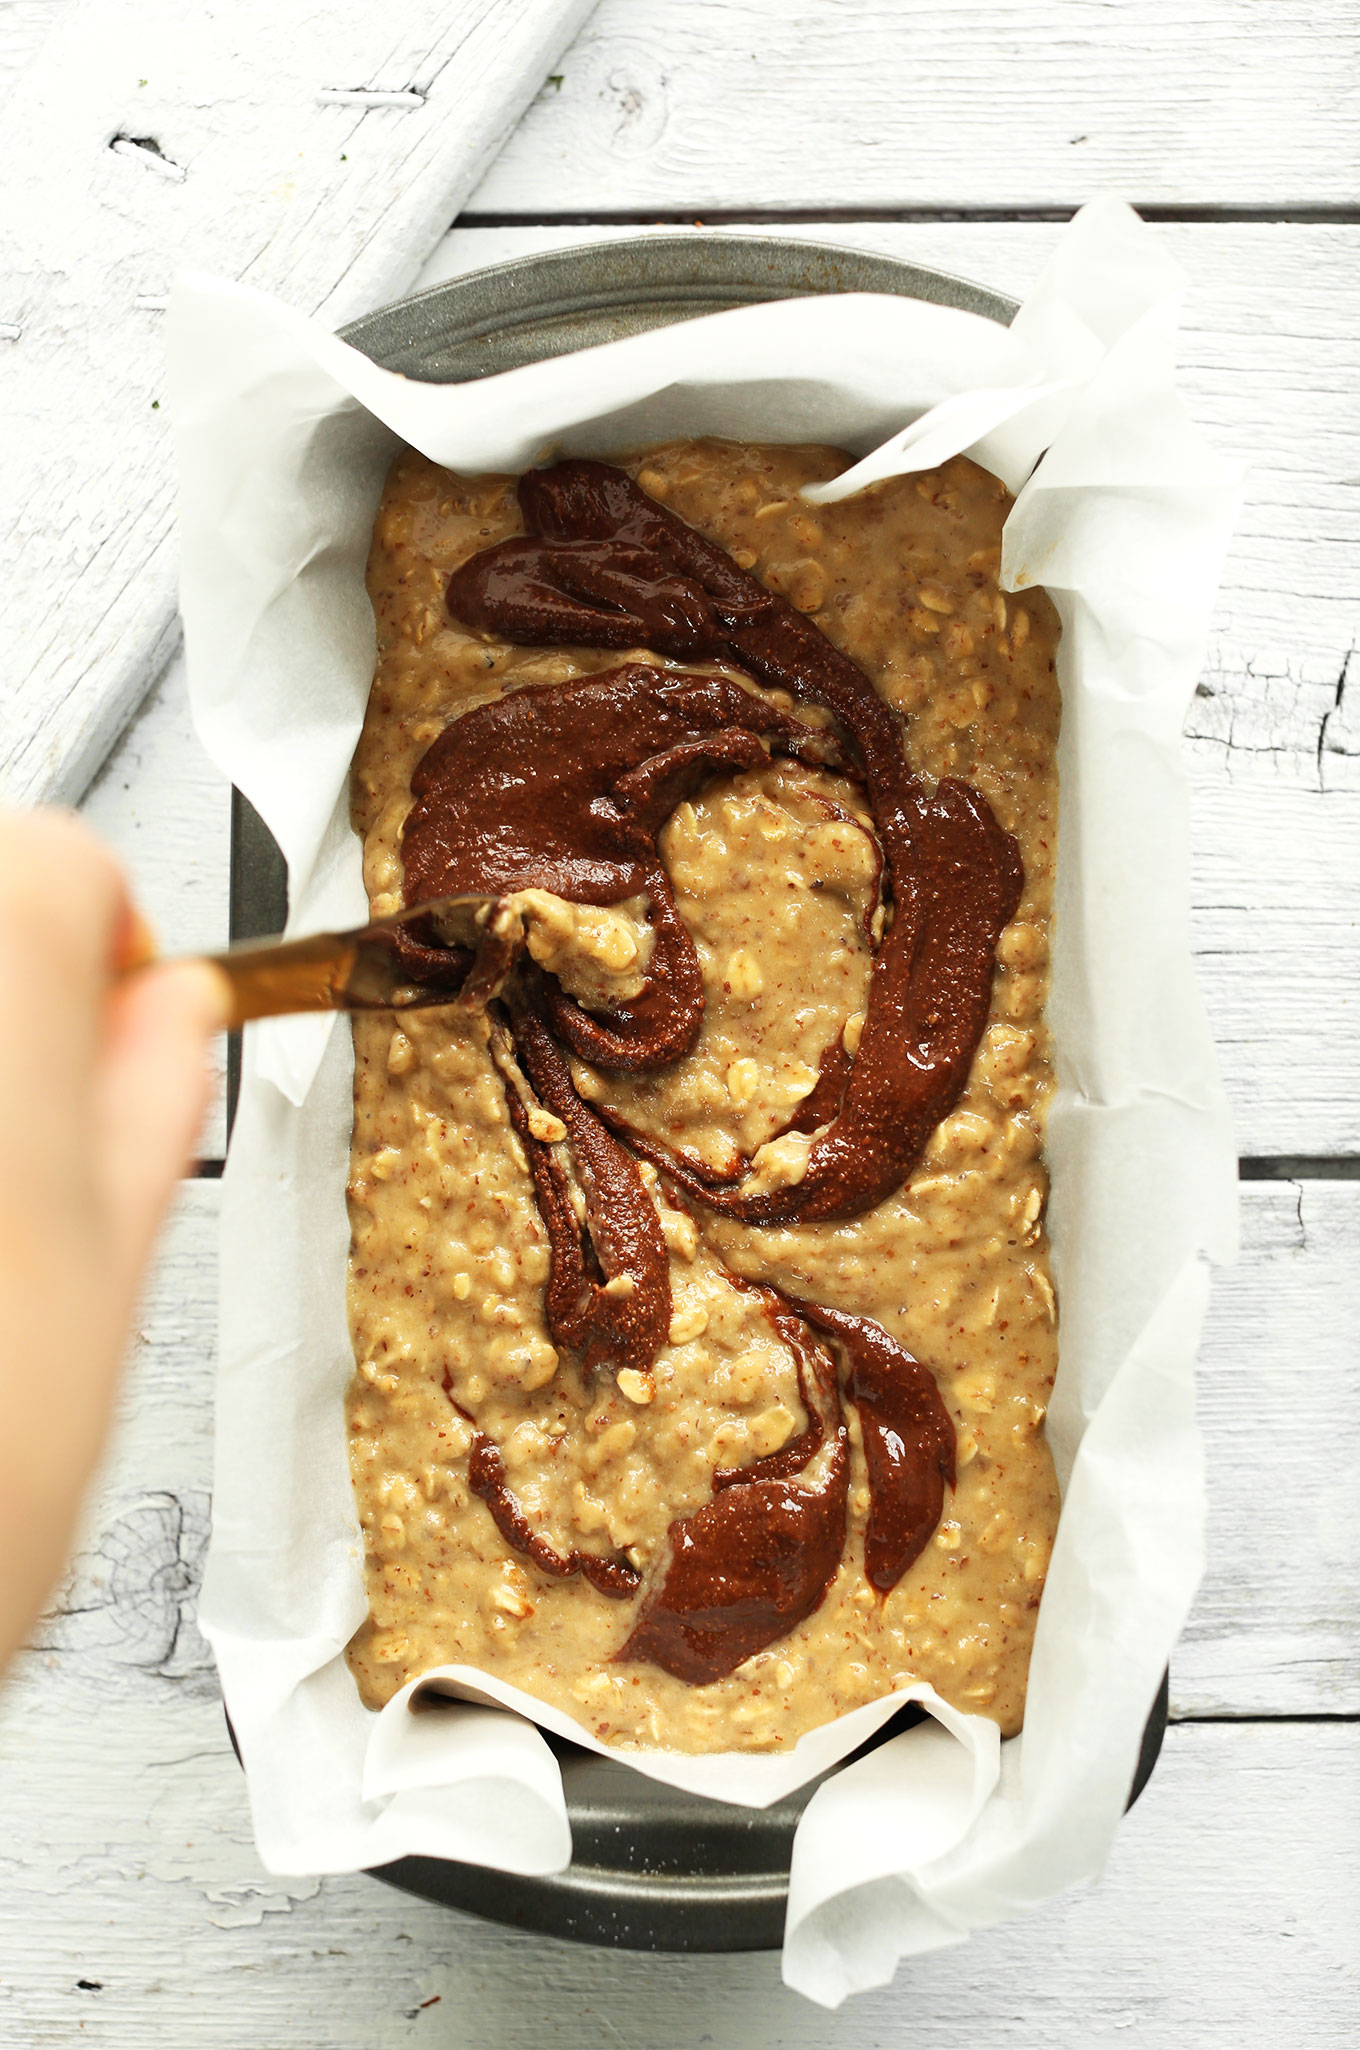 Using a knife to create a Nutella swirl in our Nutella Banana Bread recipe